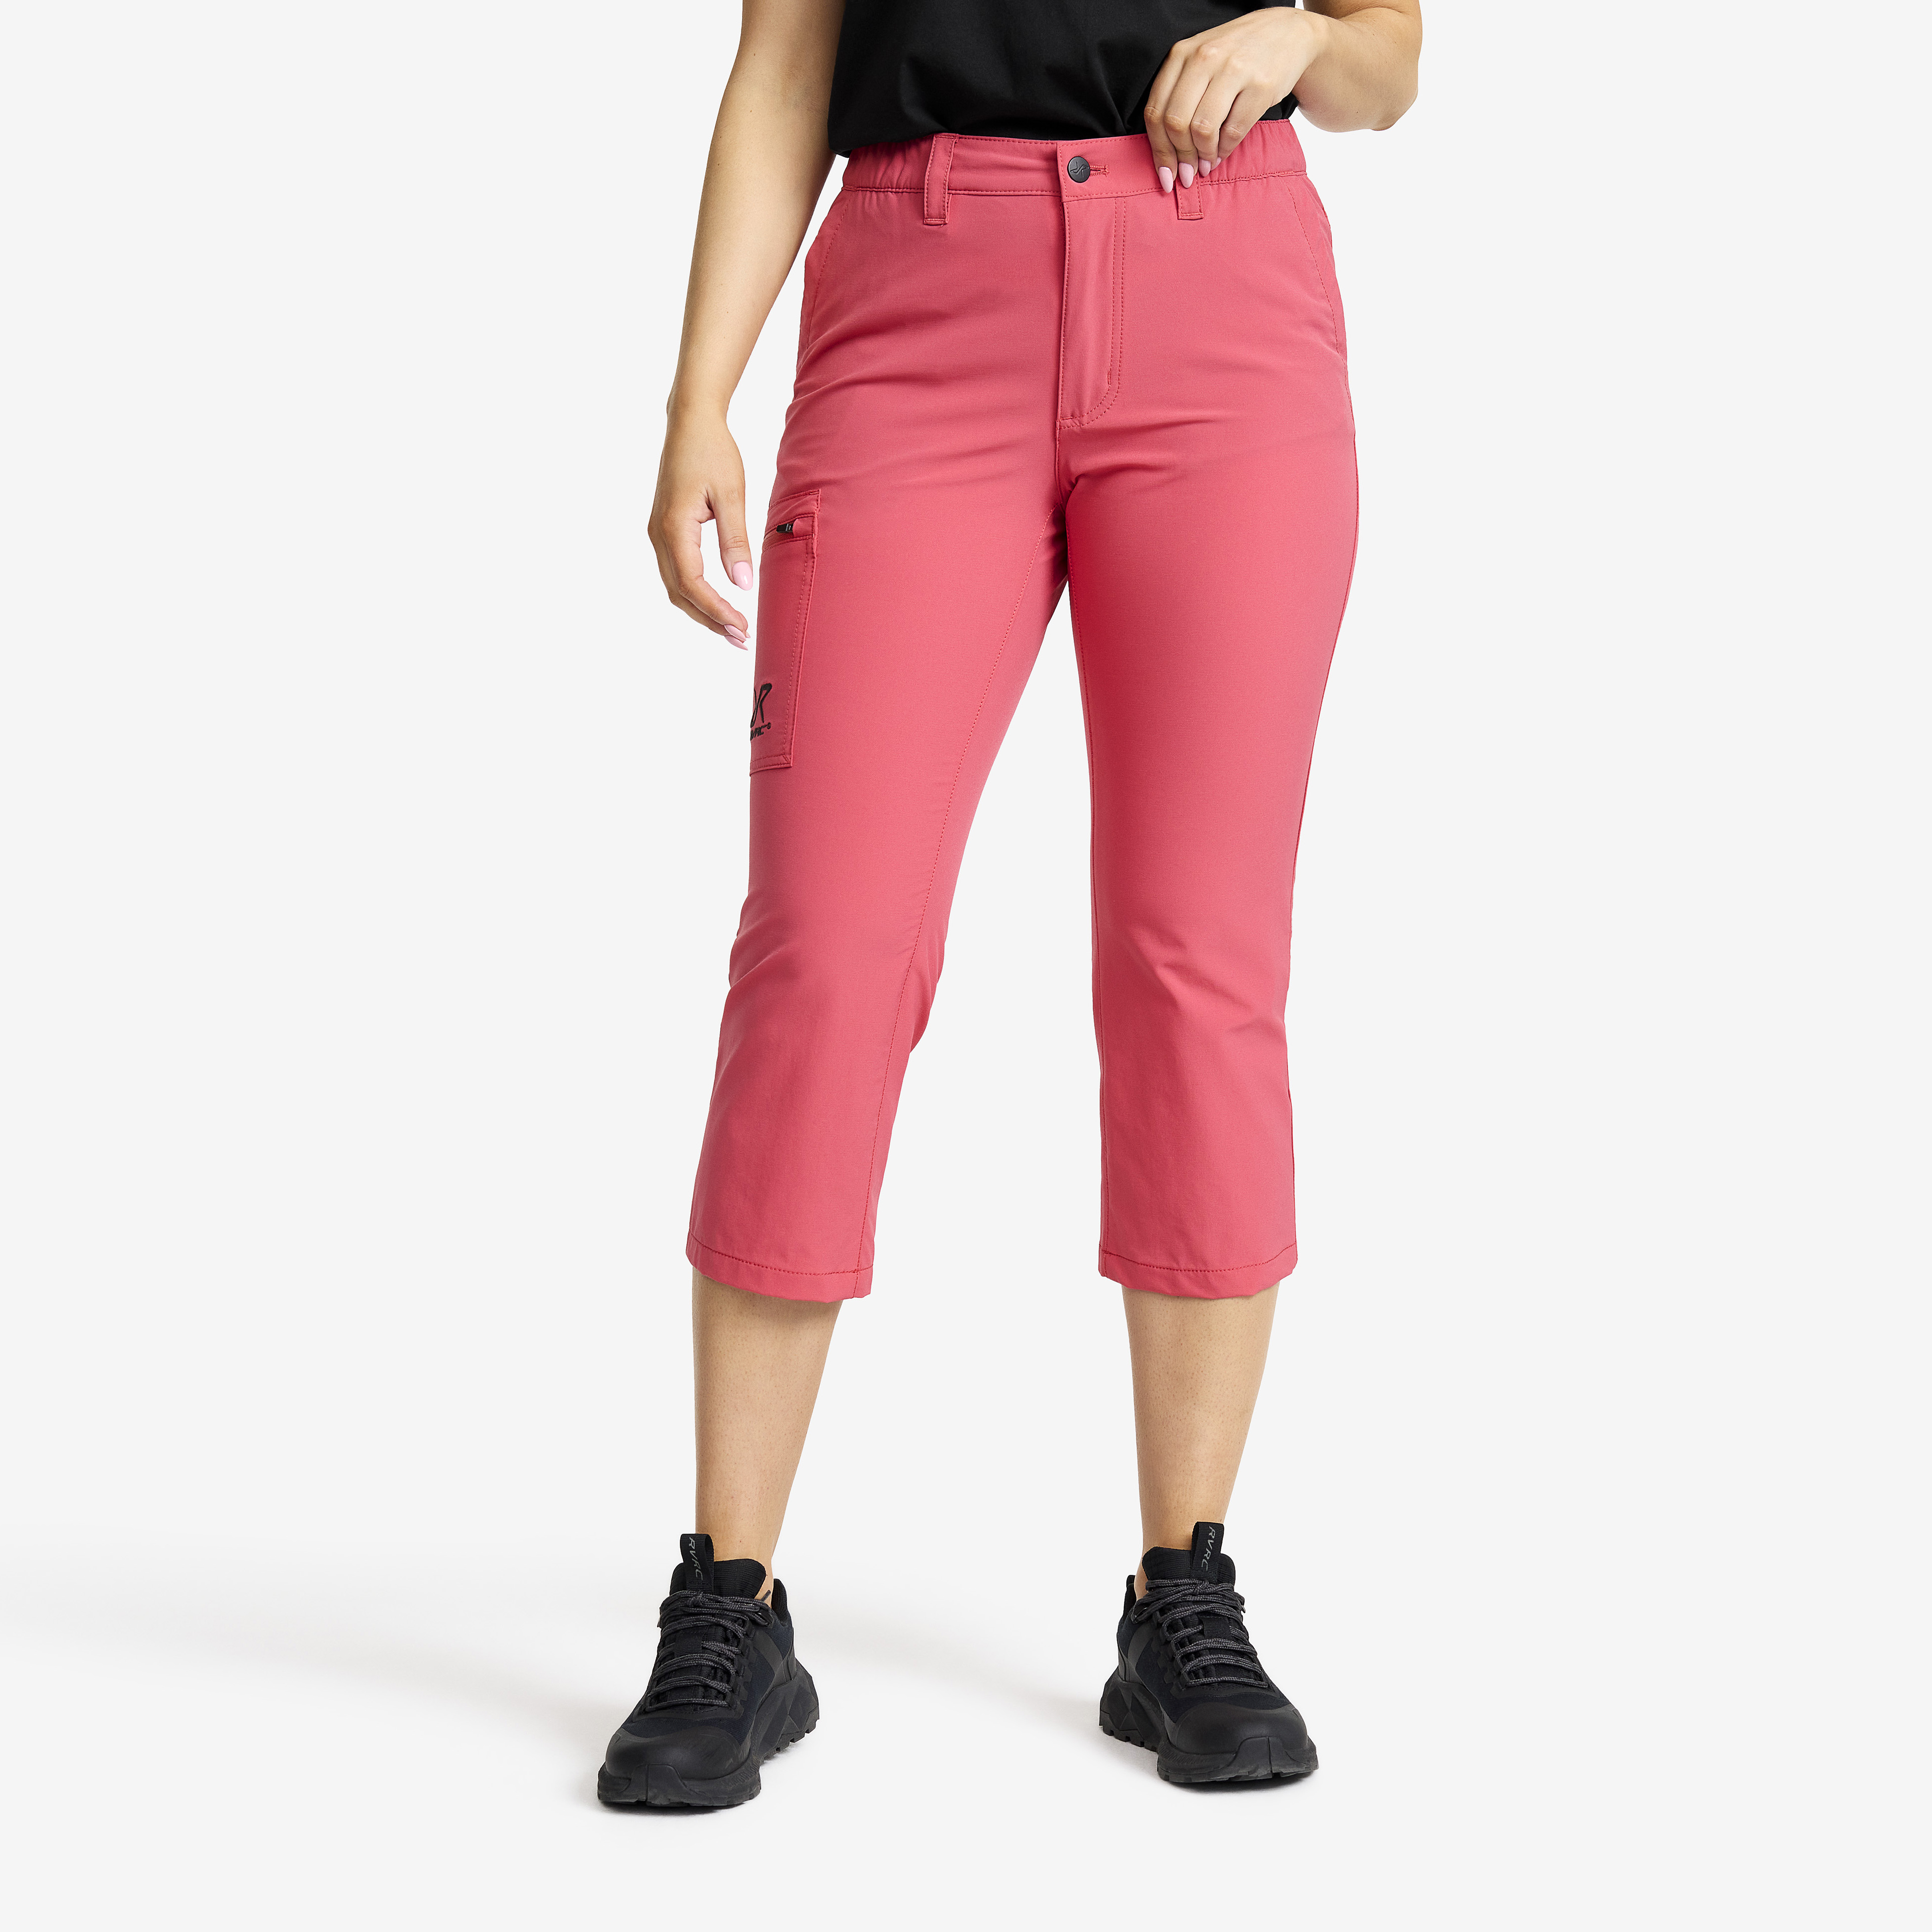 Loyal 3/4 Stretch Trousers Holly Berry Women